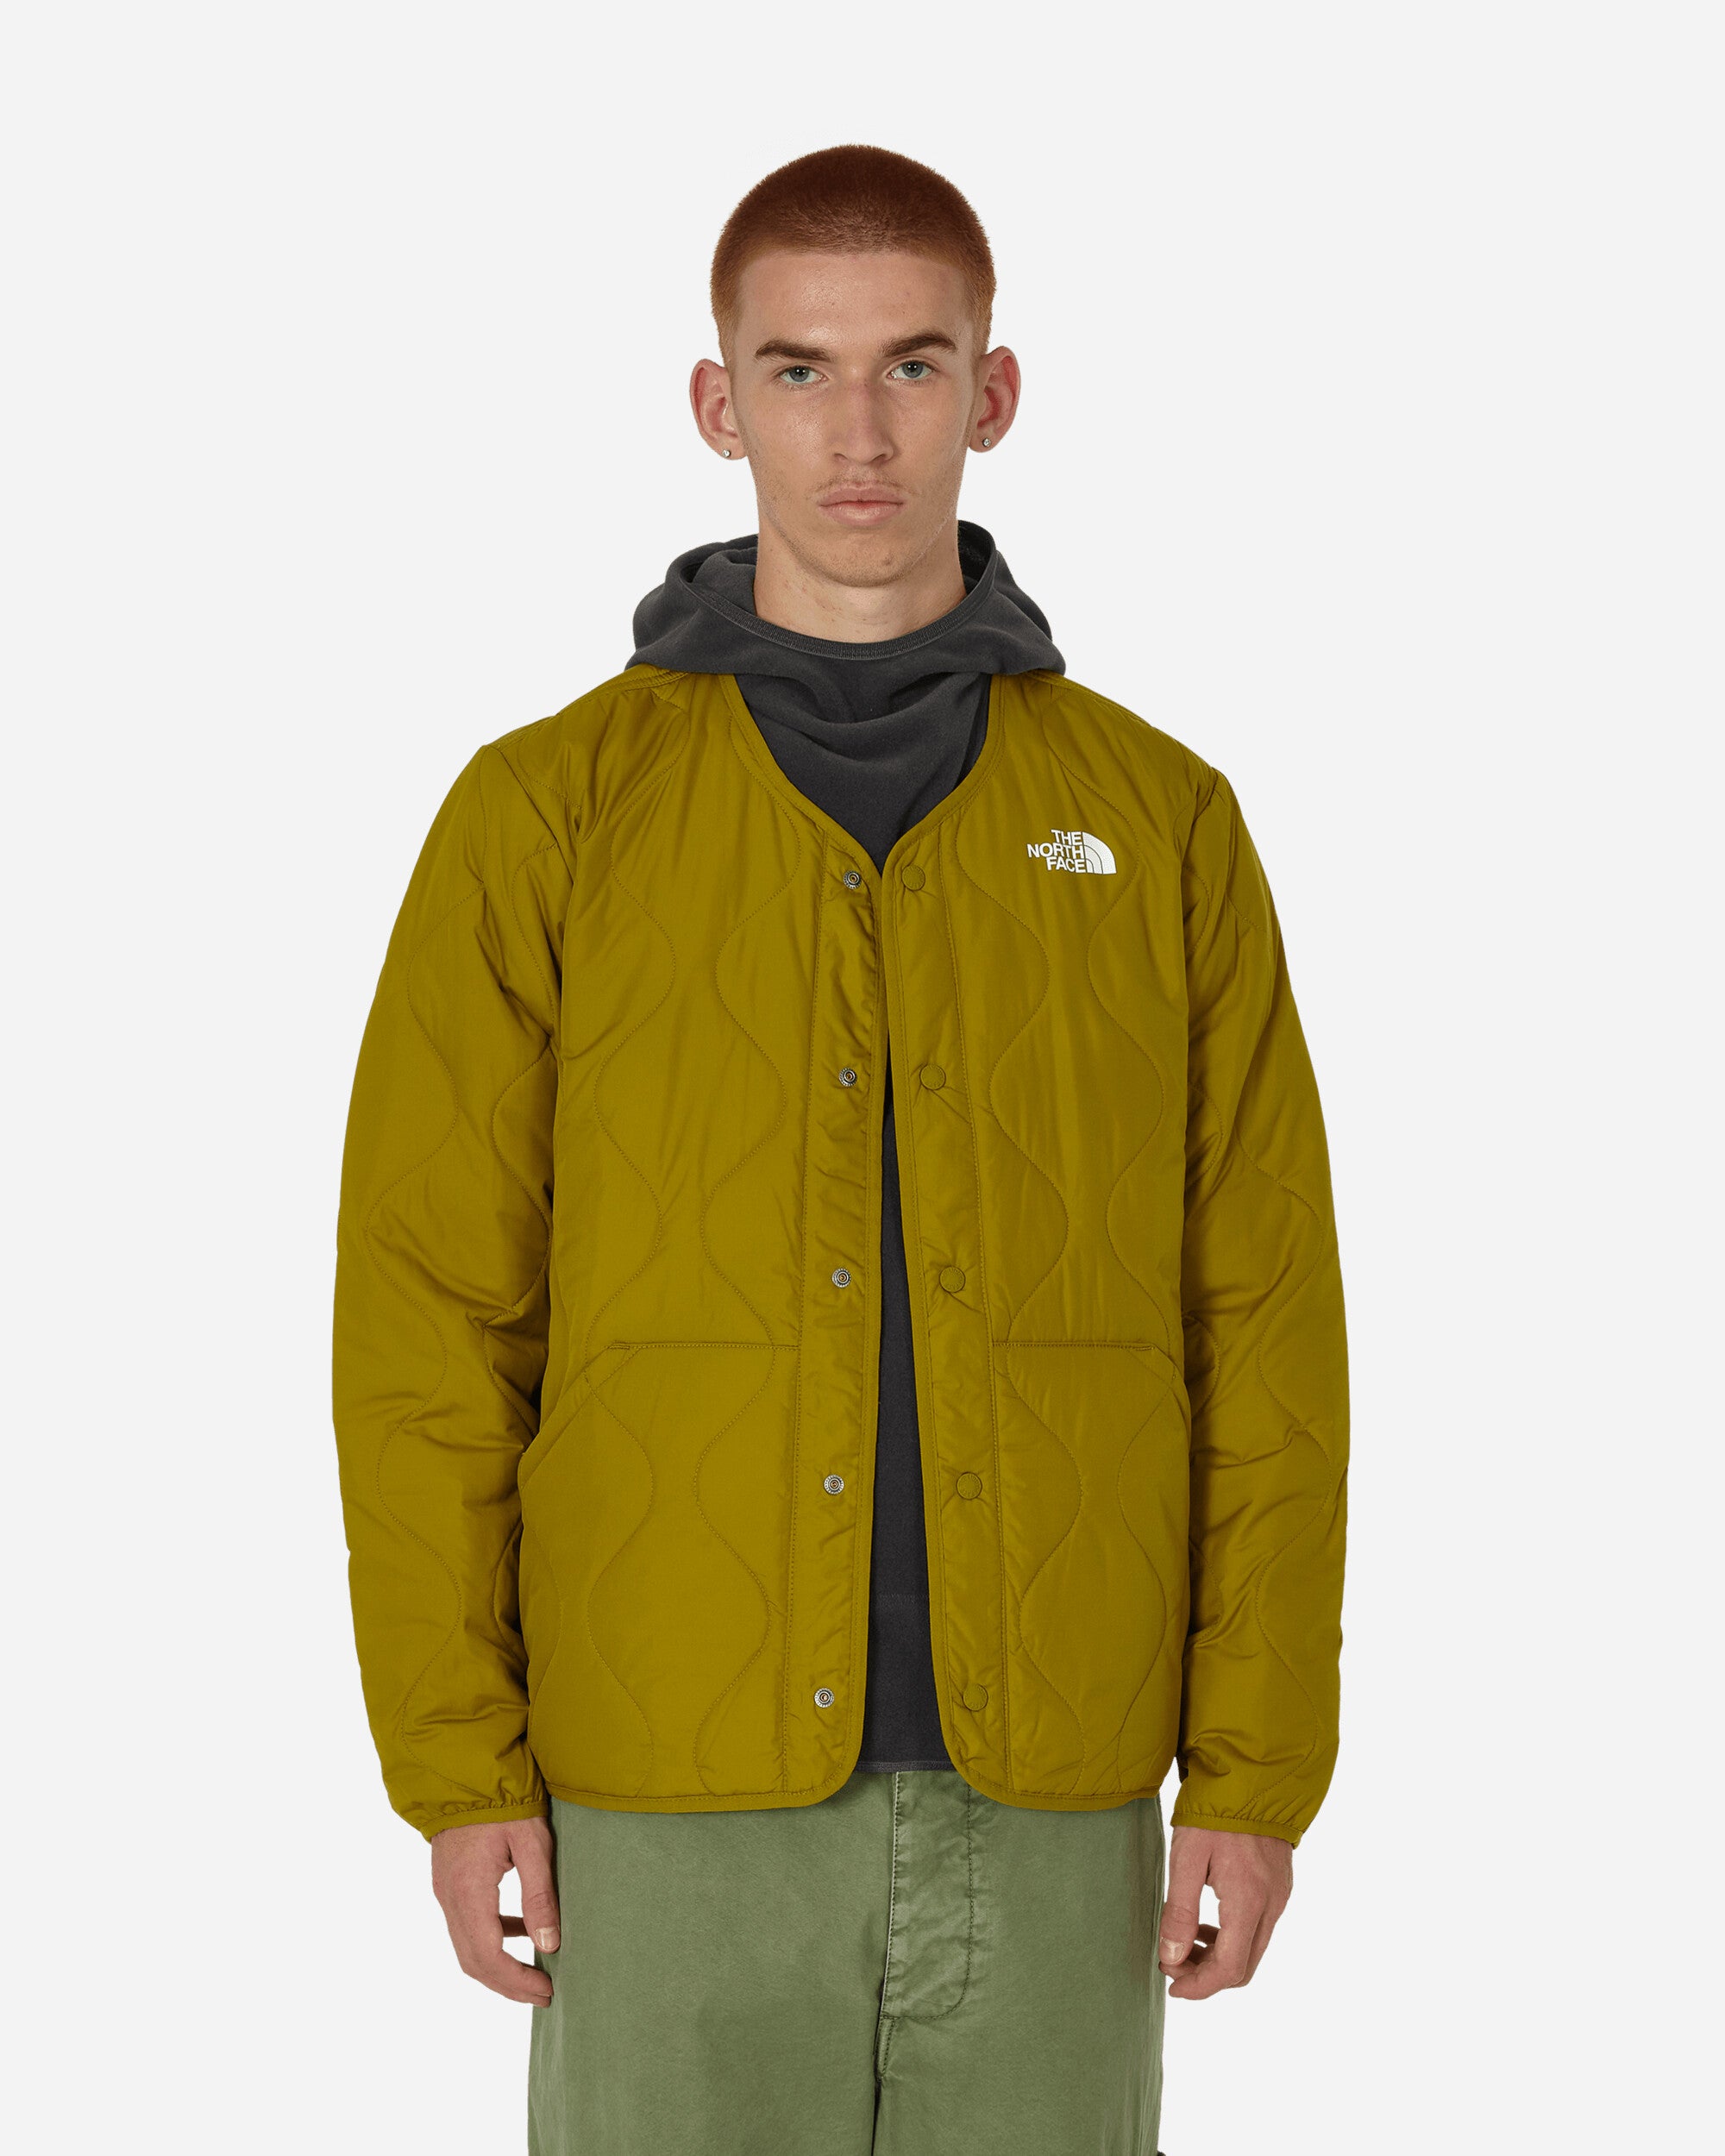 gorpcore - Google Search  North face mountain jacket, The north